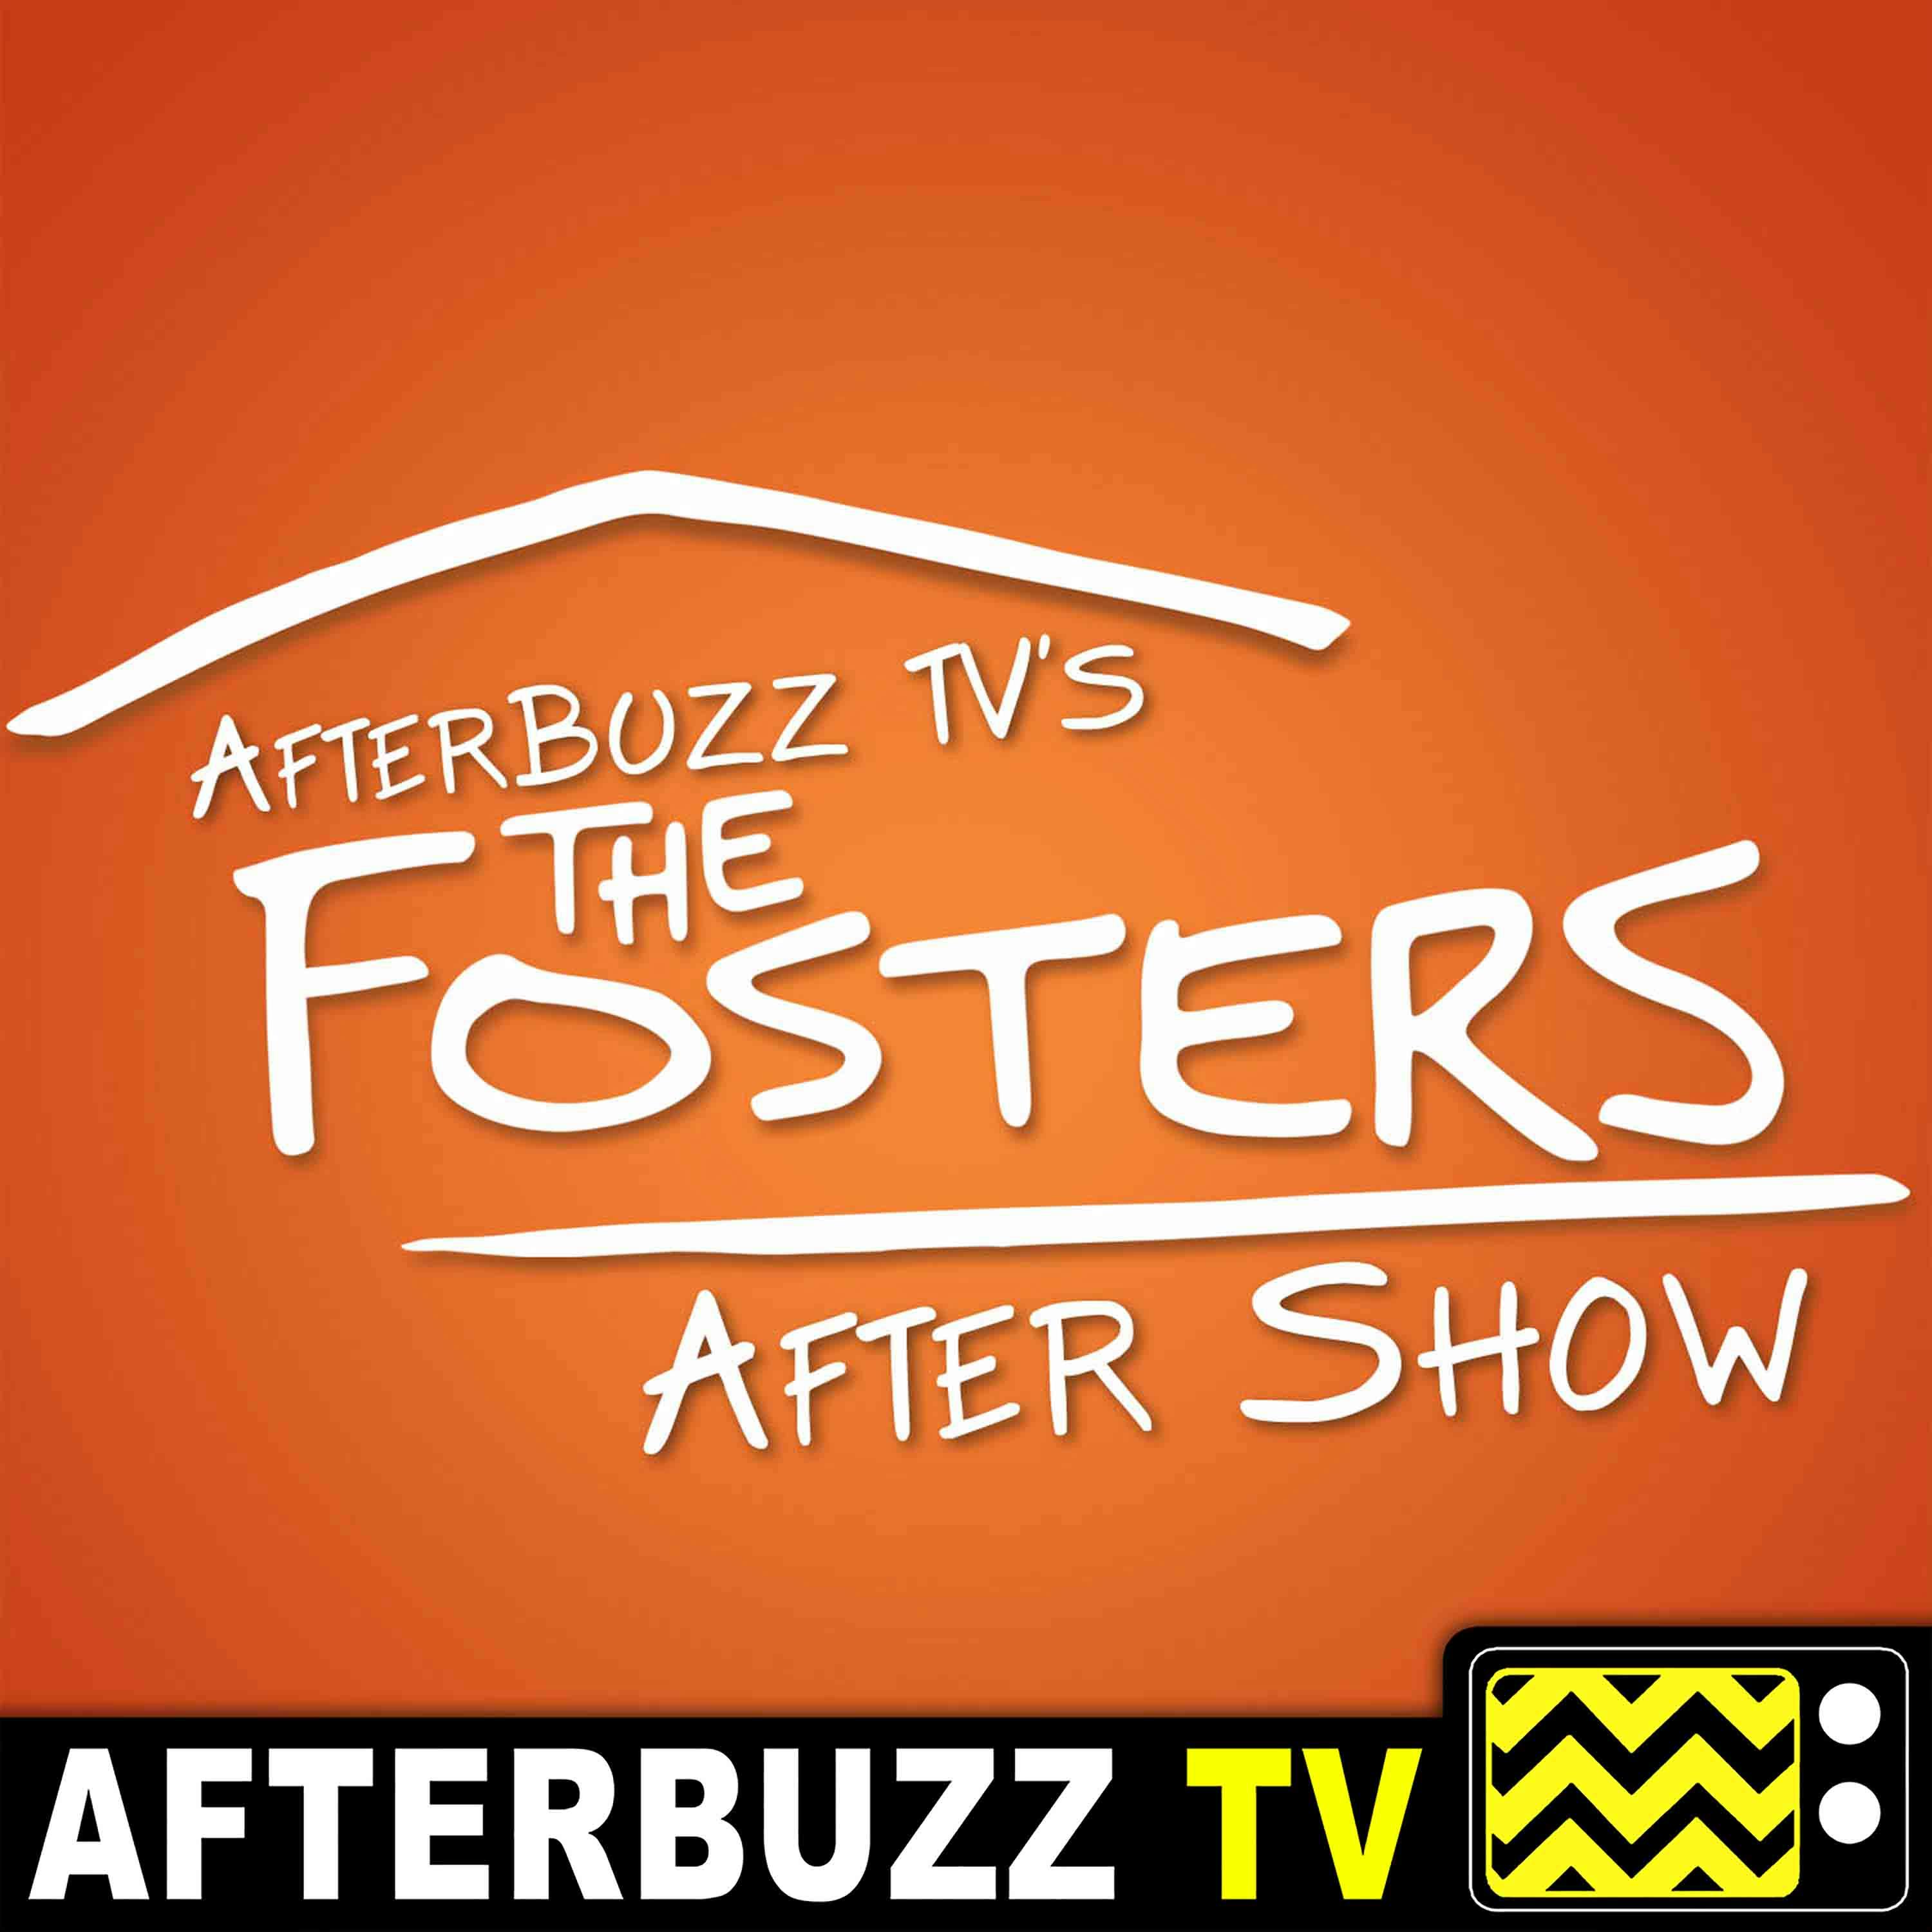 The Fosters S:4 | Anna Grace Barlow Guests On Potential Energy E:1 | AfterBuzz TV AfterShow